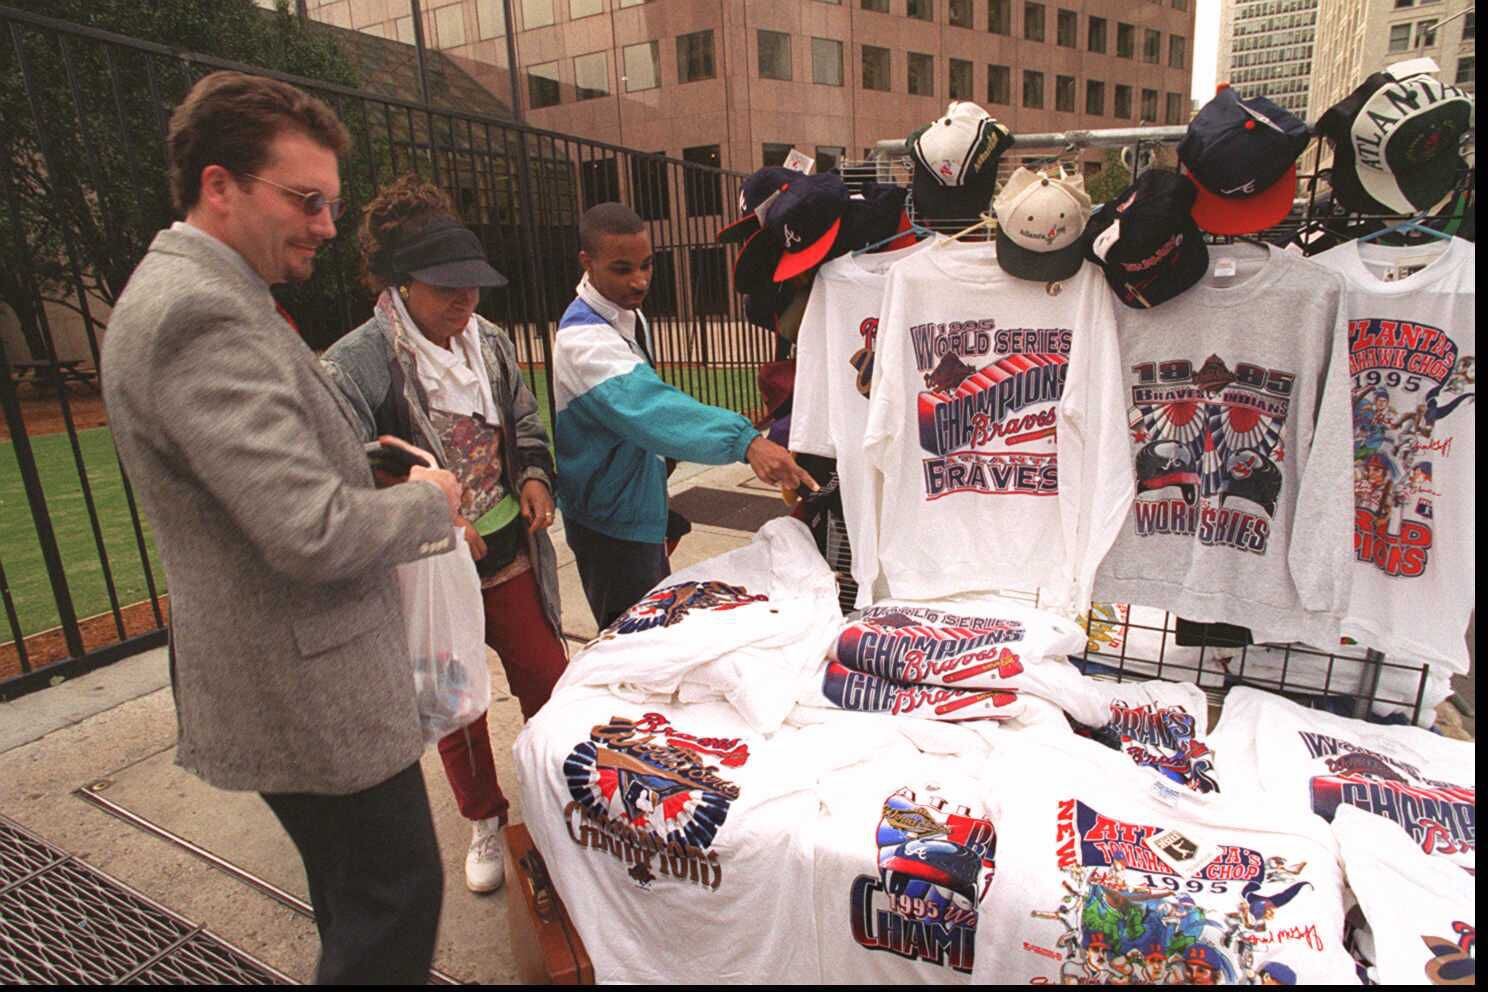 On Oct. 28, 1995. the Atlanta Braves became World Series champions! What  memories do you have of that historic run? Tells us below and…